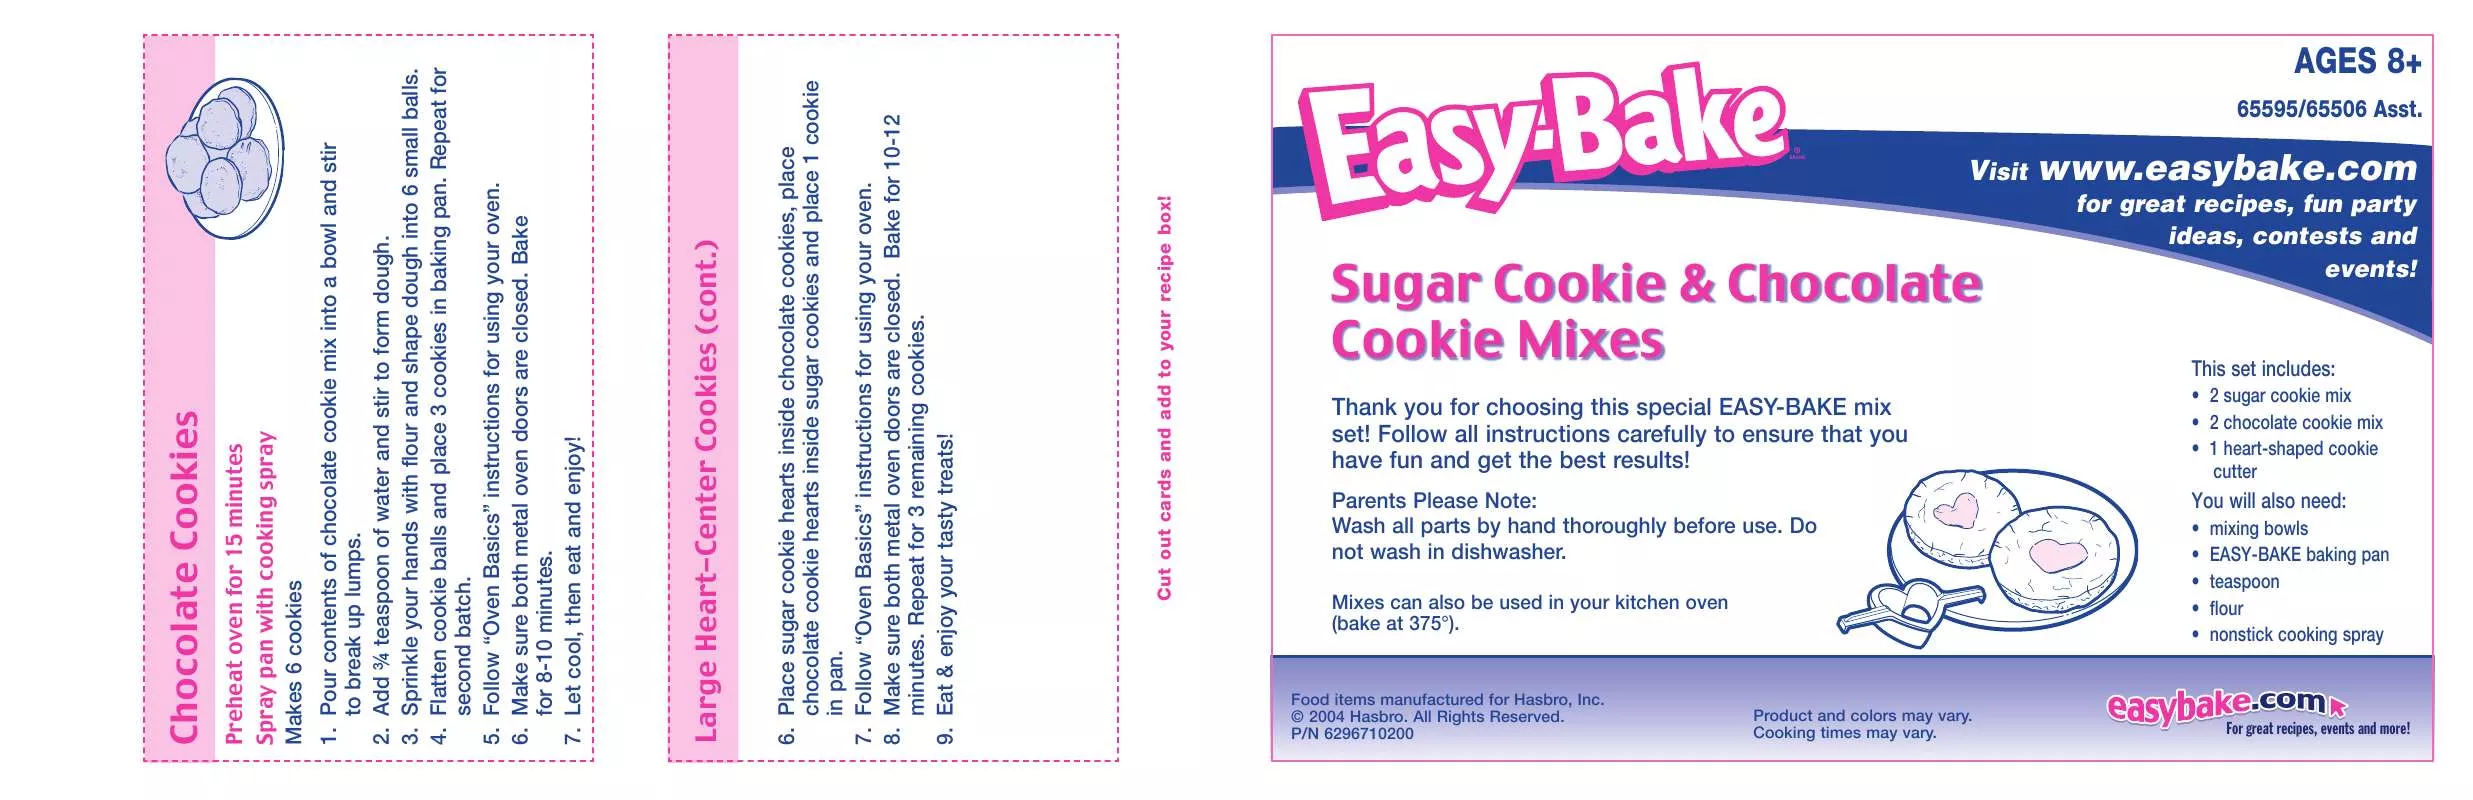 Mode d'emploi HASBRO EASY BAKE SUGAR COOKIE AND CHOCOLATE COOKIE MIXES 65595